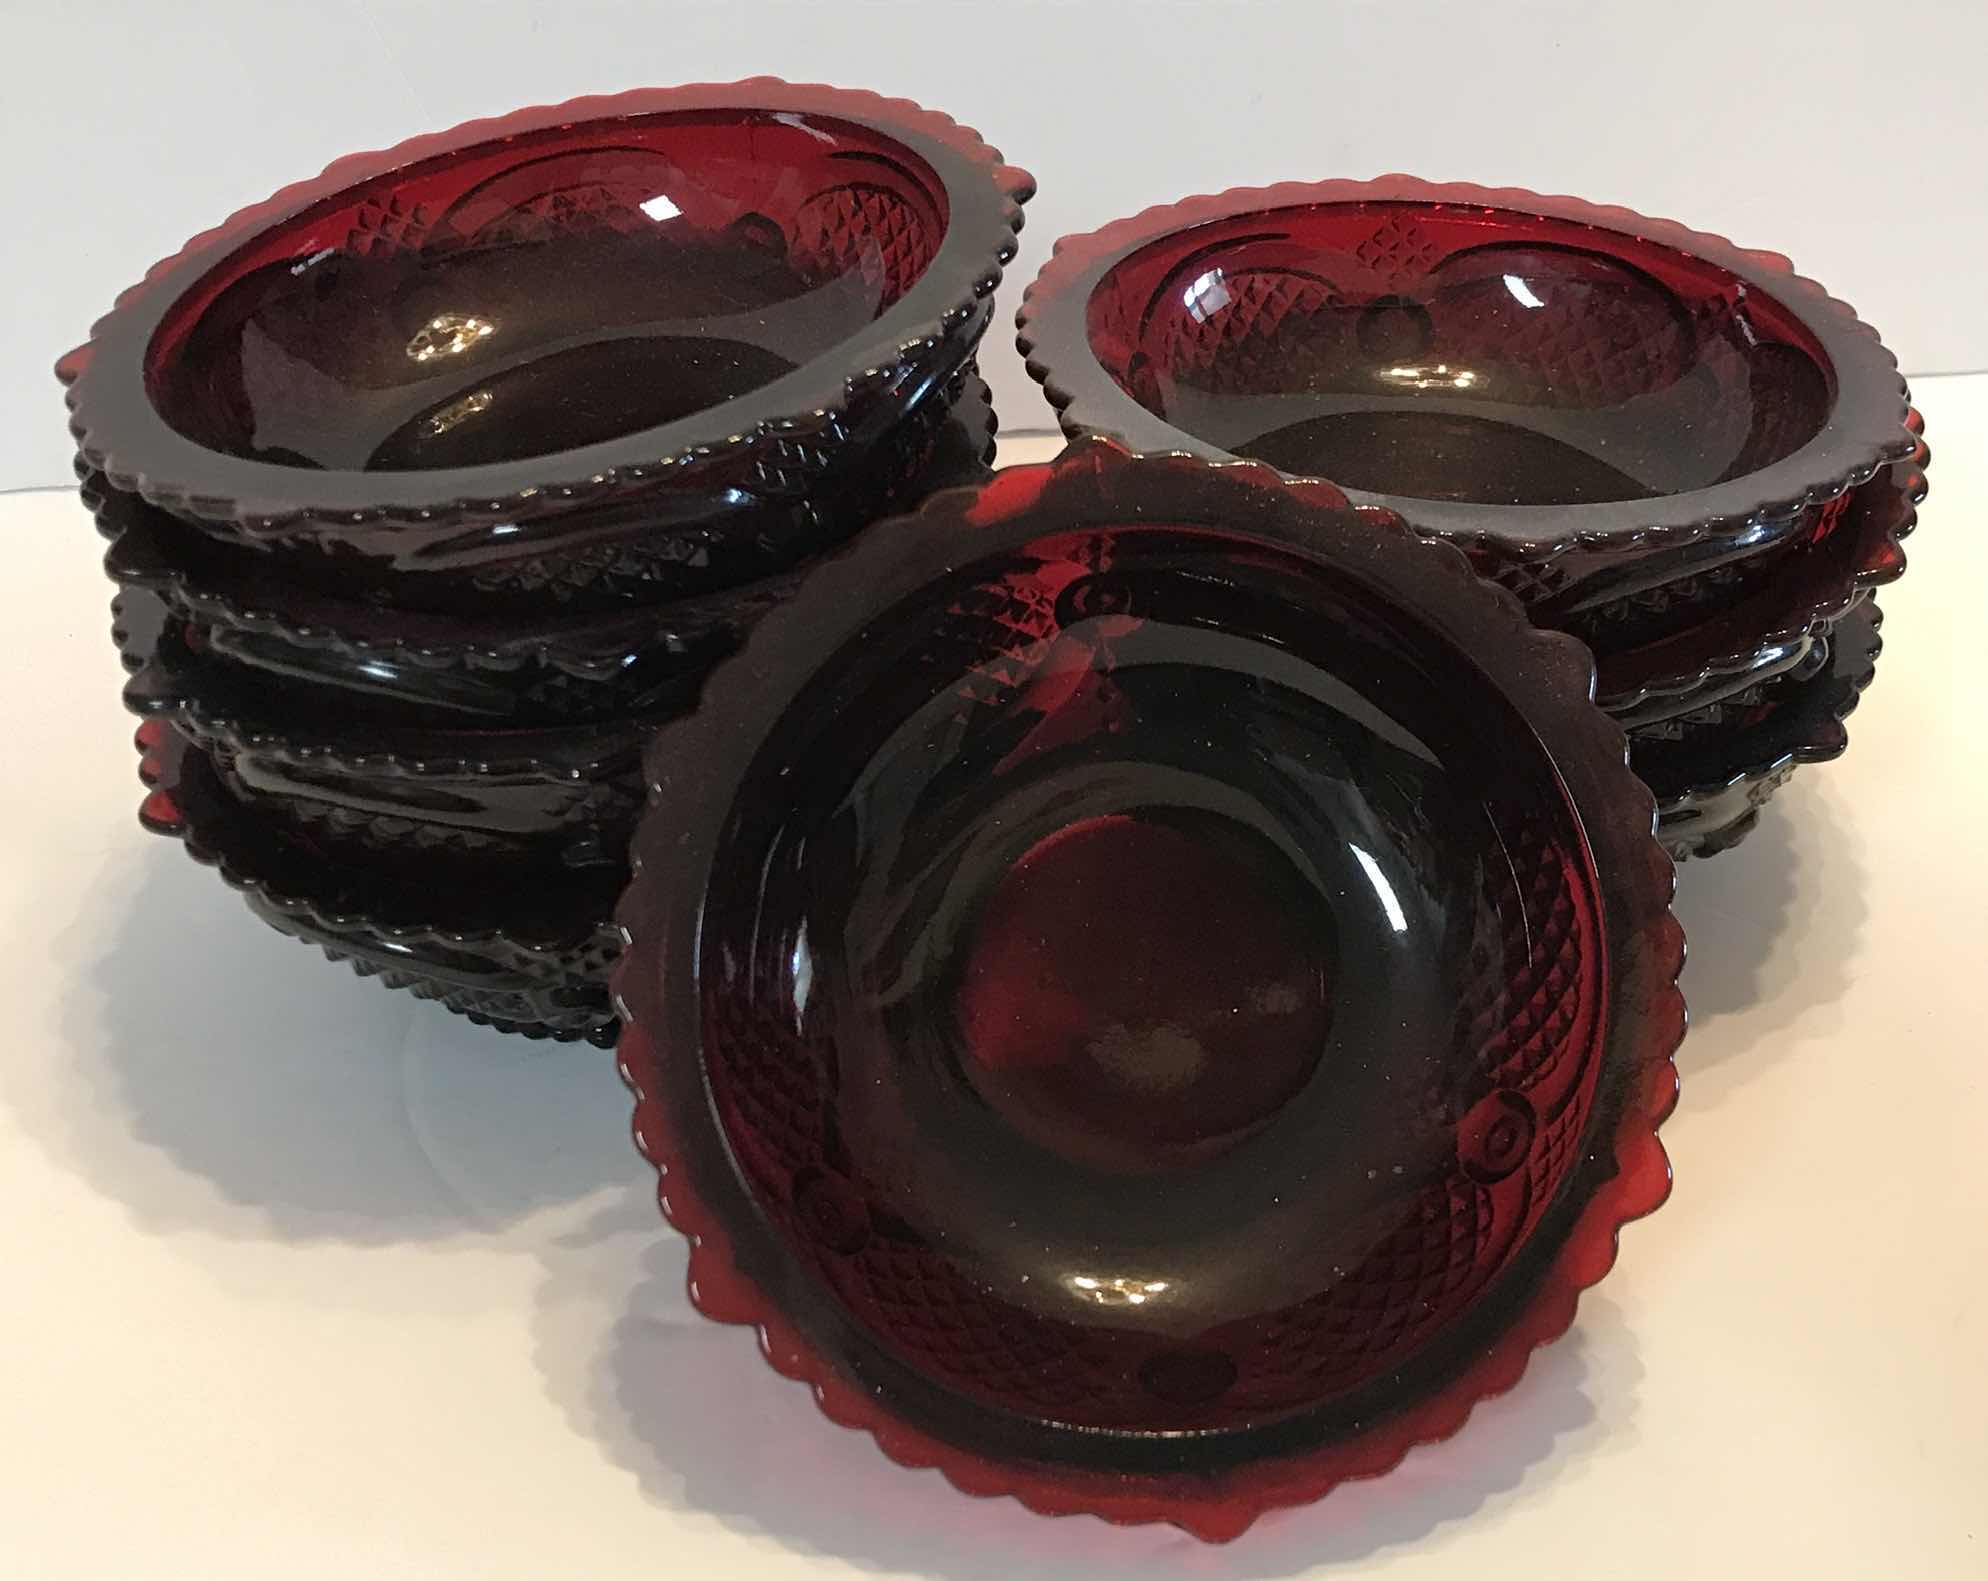 Photo 1 of VINTAGE CAPE COD ROYAL RUBY RED AVON GLASS FRUIT/ DESSERT BOWLS SET OF 8 - MORE OF THIS COLLECTION IN AUCTION